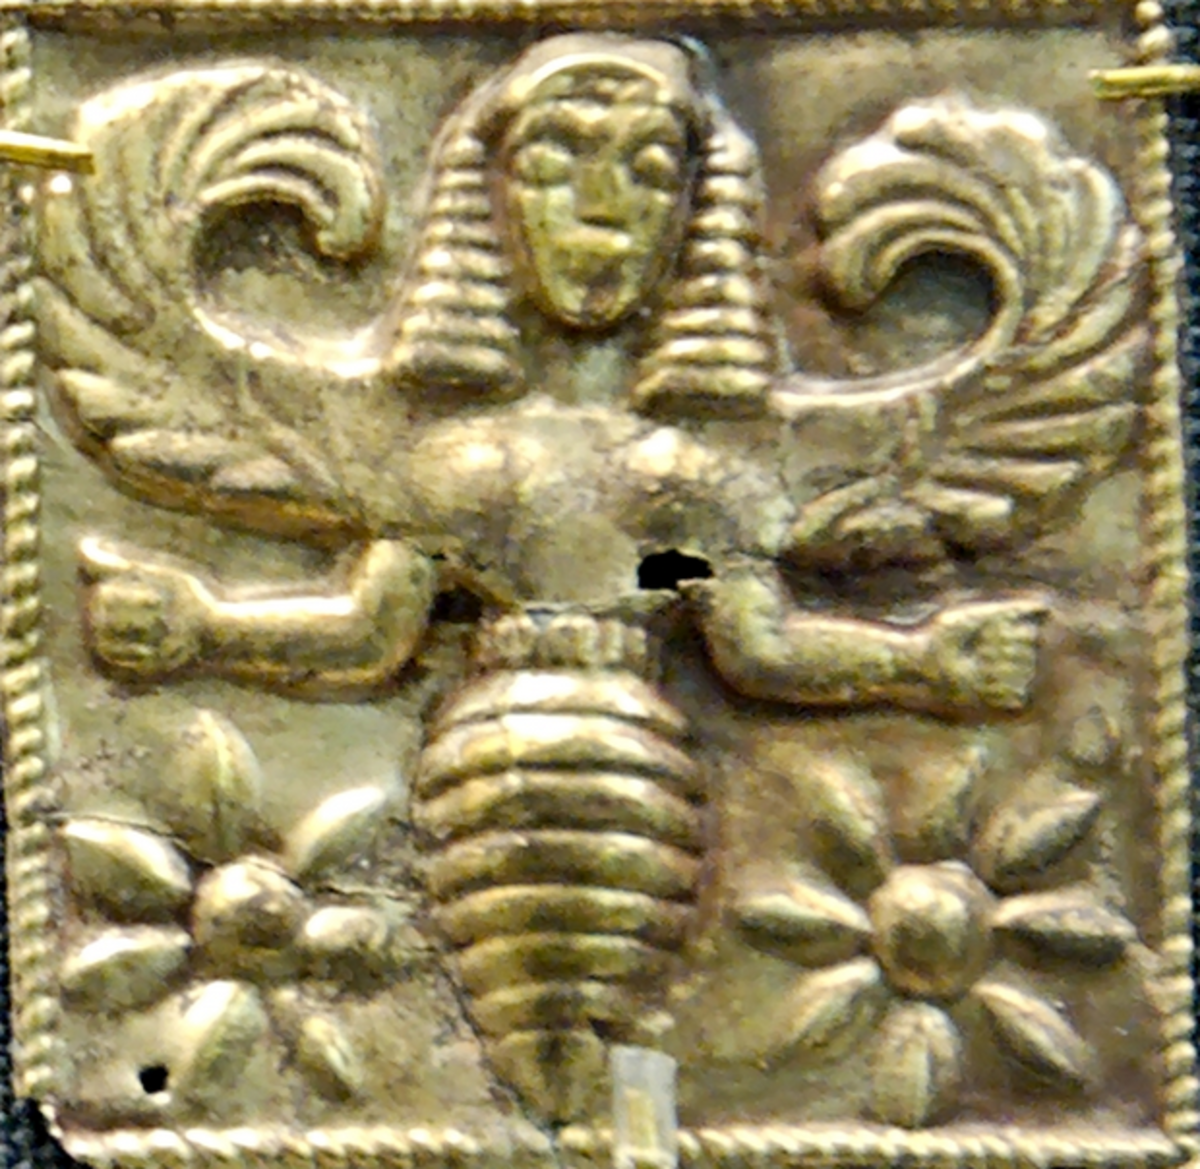 Bee goddess from the 7th Century BCE.